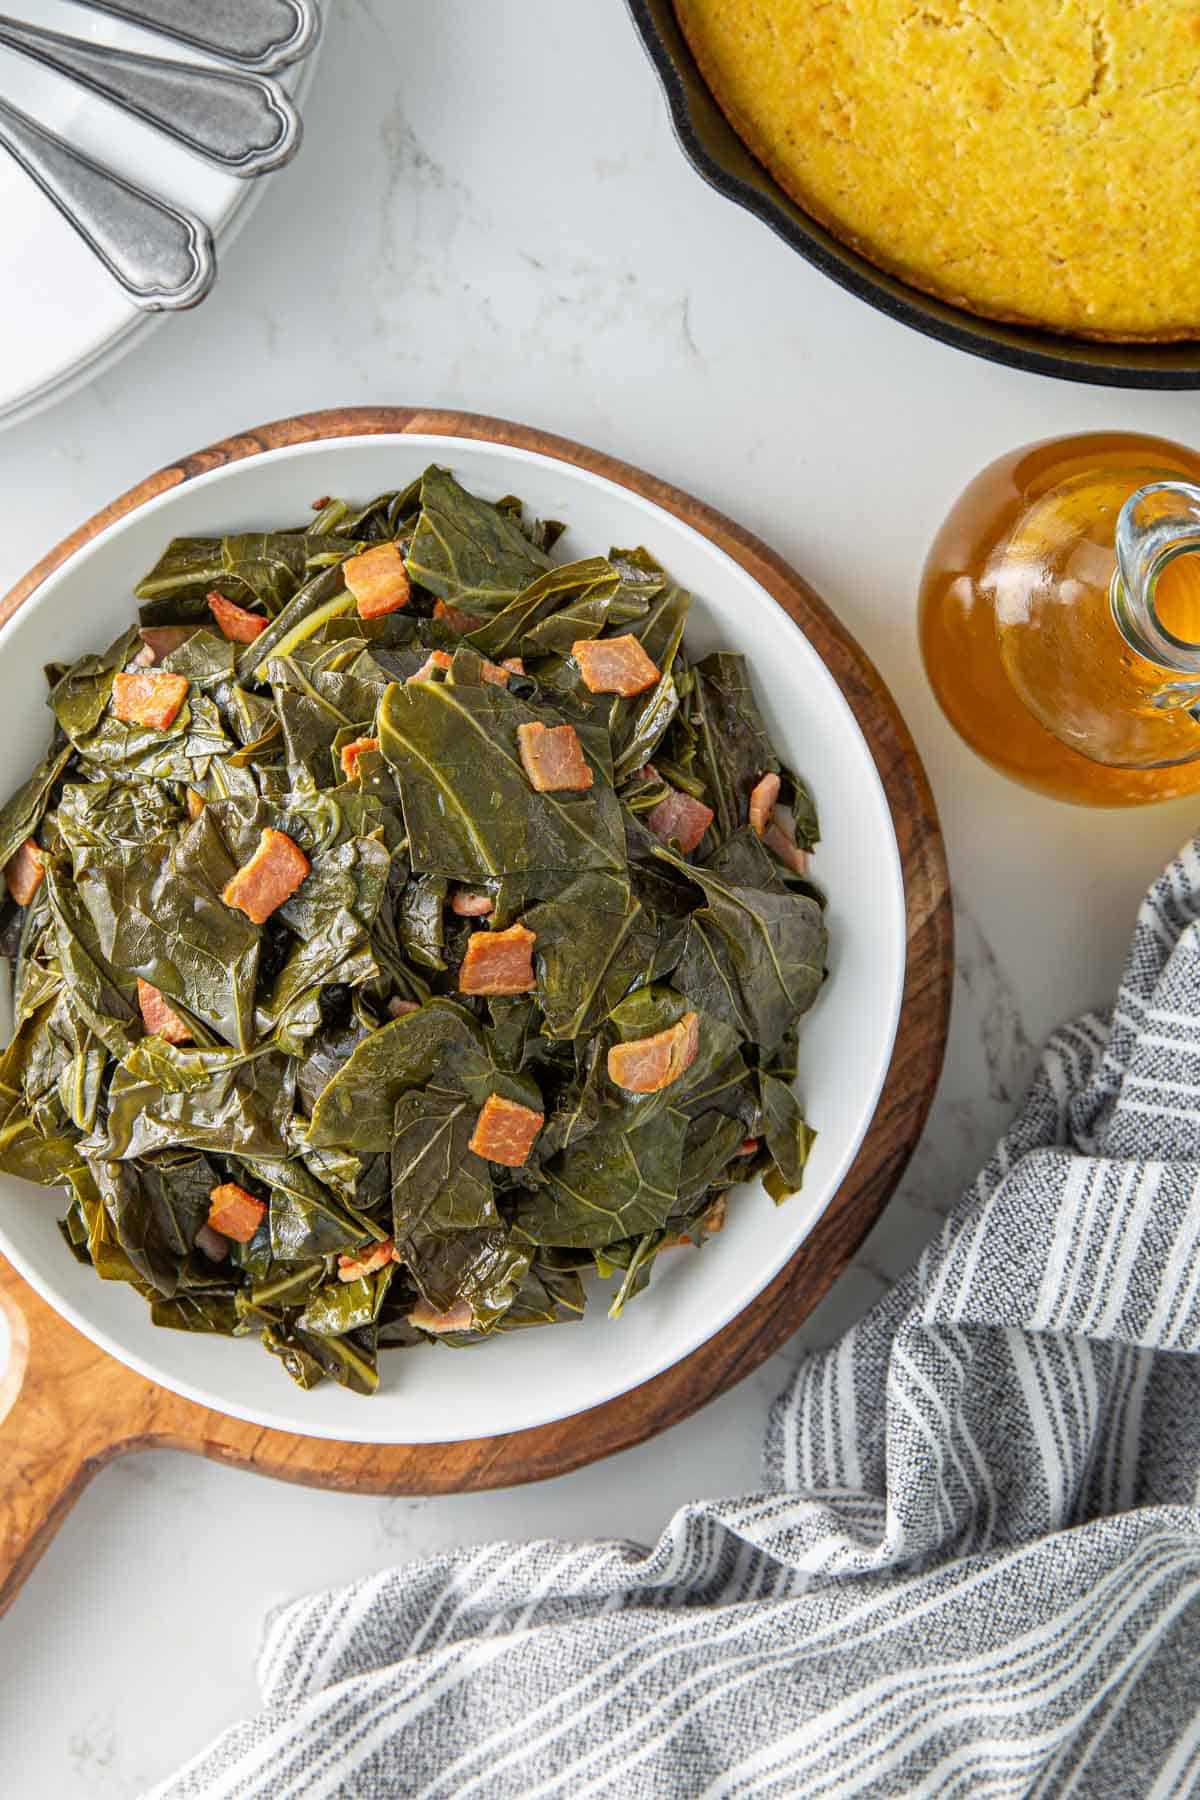 Overhead view of a bowl of collards by a skillet of cornbread and a bottle of vinegar.